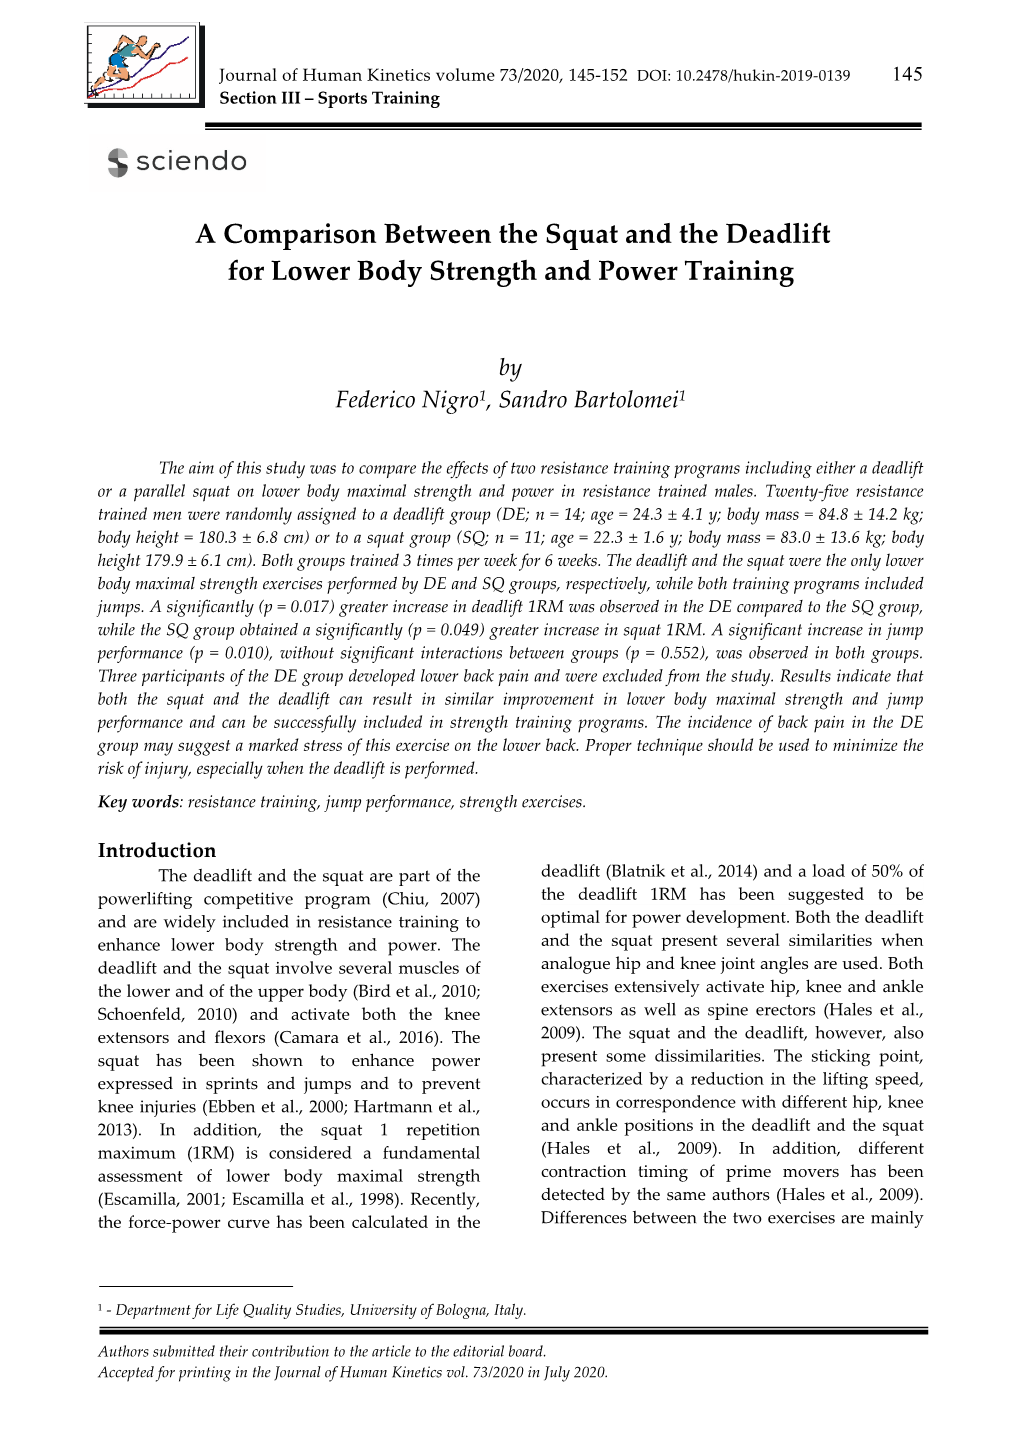 A Comparison Between the Squat and the Deadlift for Lower Body Strength and Power Training